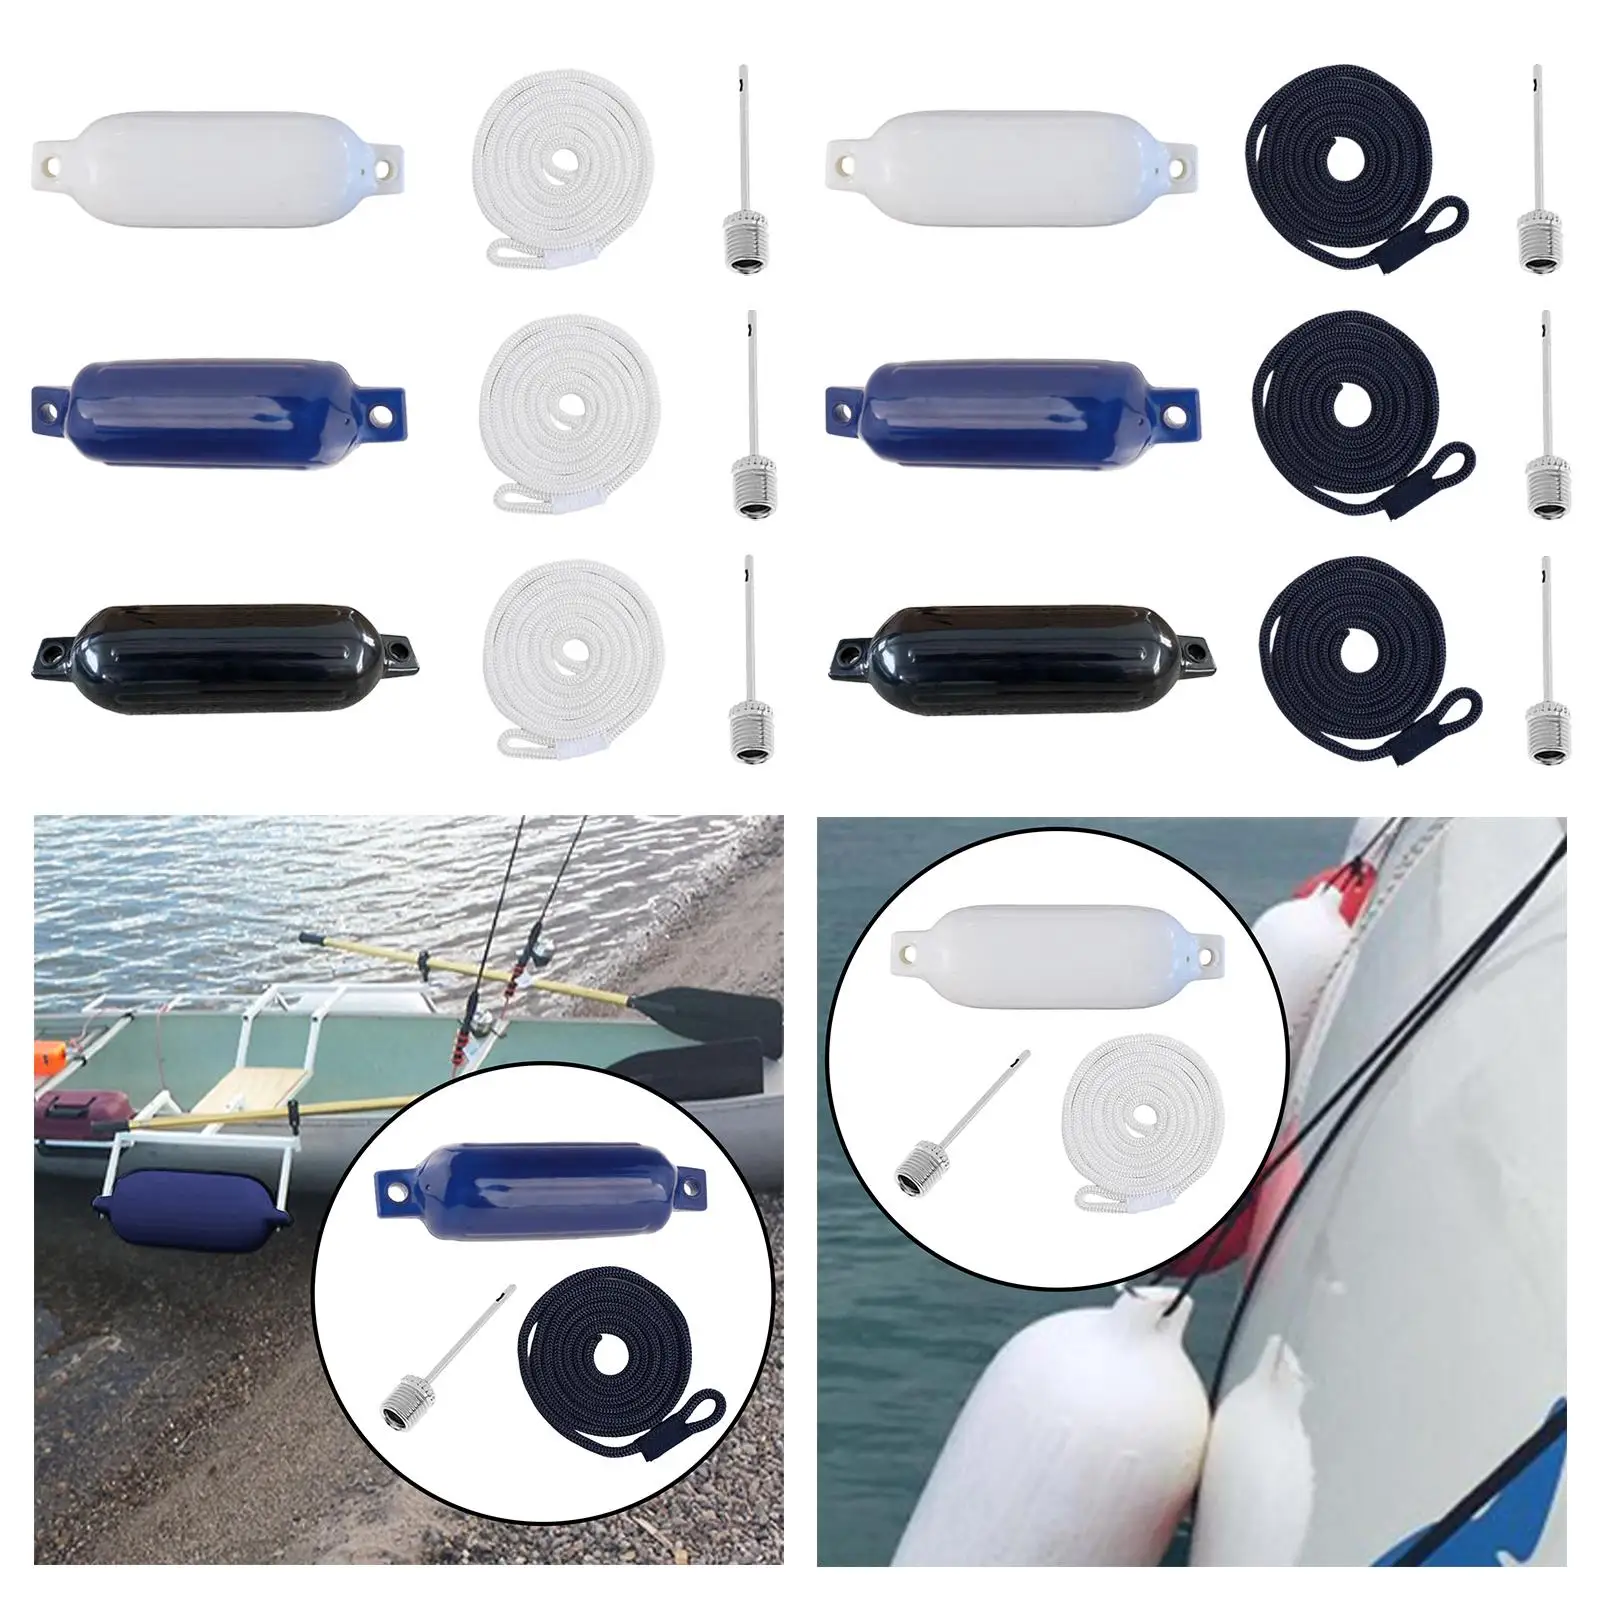 Marine Dock Shield Protection Yacht Boat Dock for Pontoon Boat Boat Bumpers